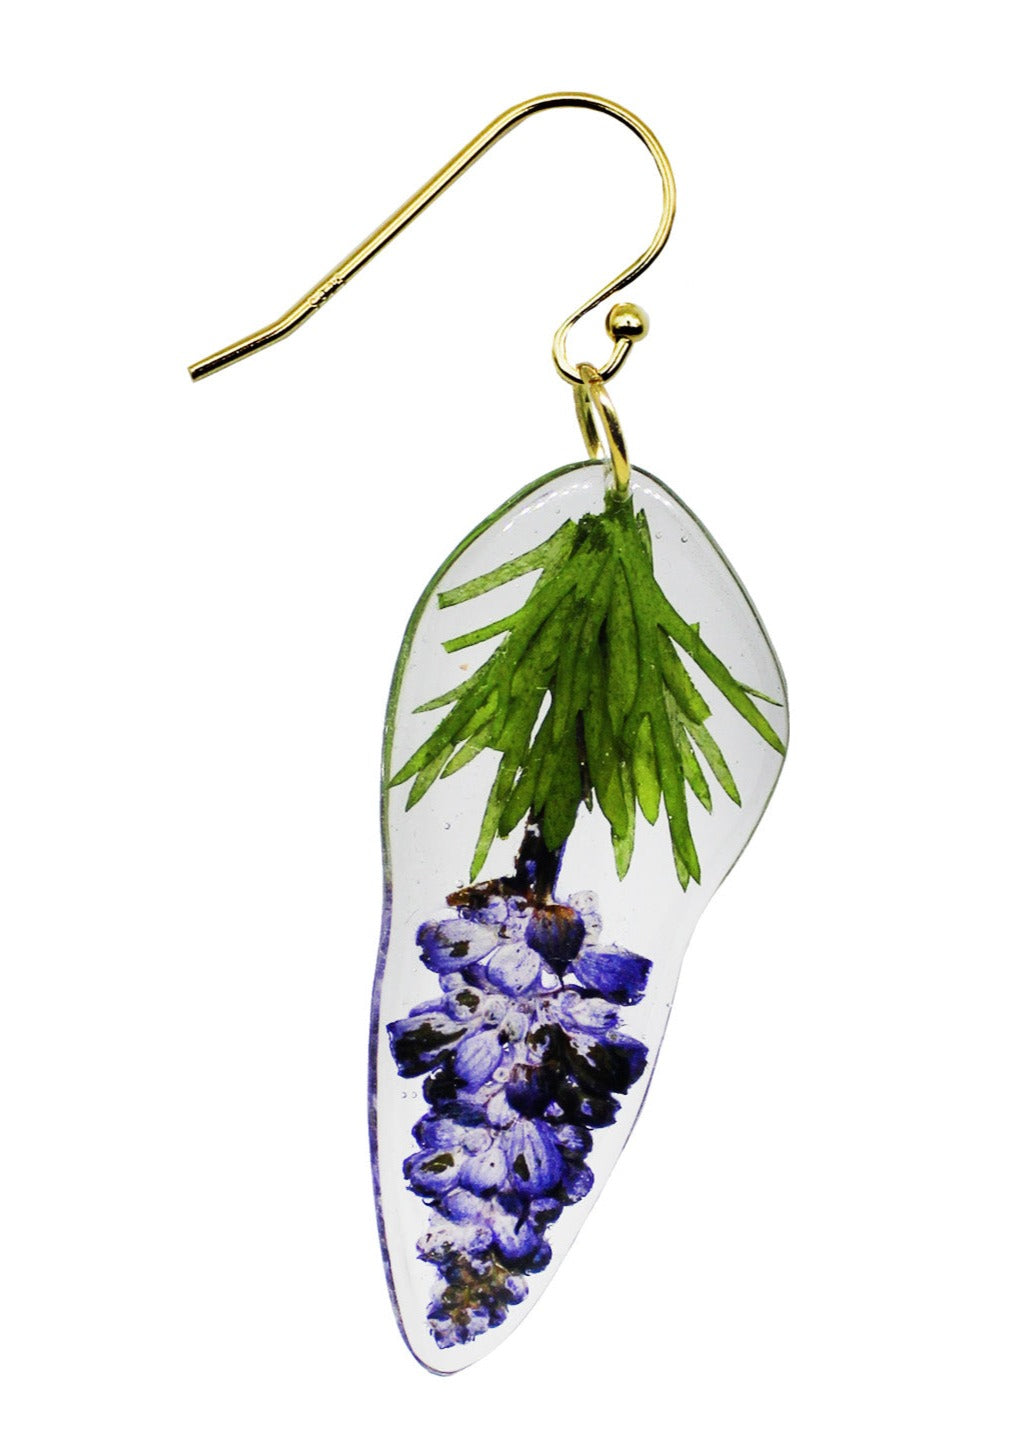 Resin Coated Purple Sage flower with Green Leaved on a French Hook Earring